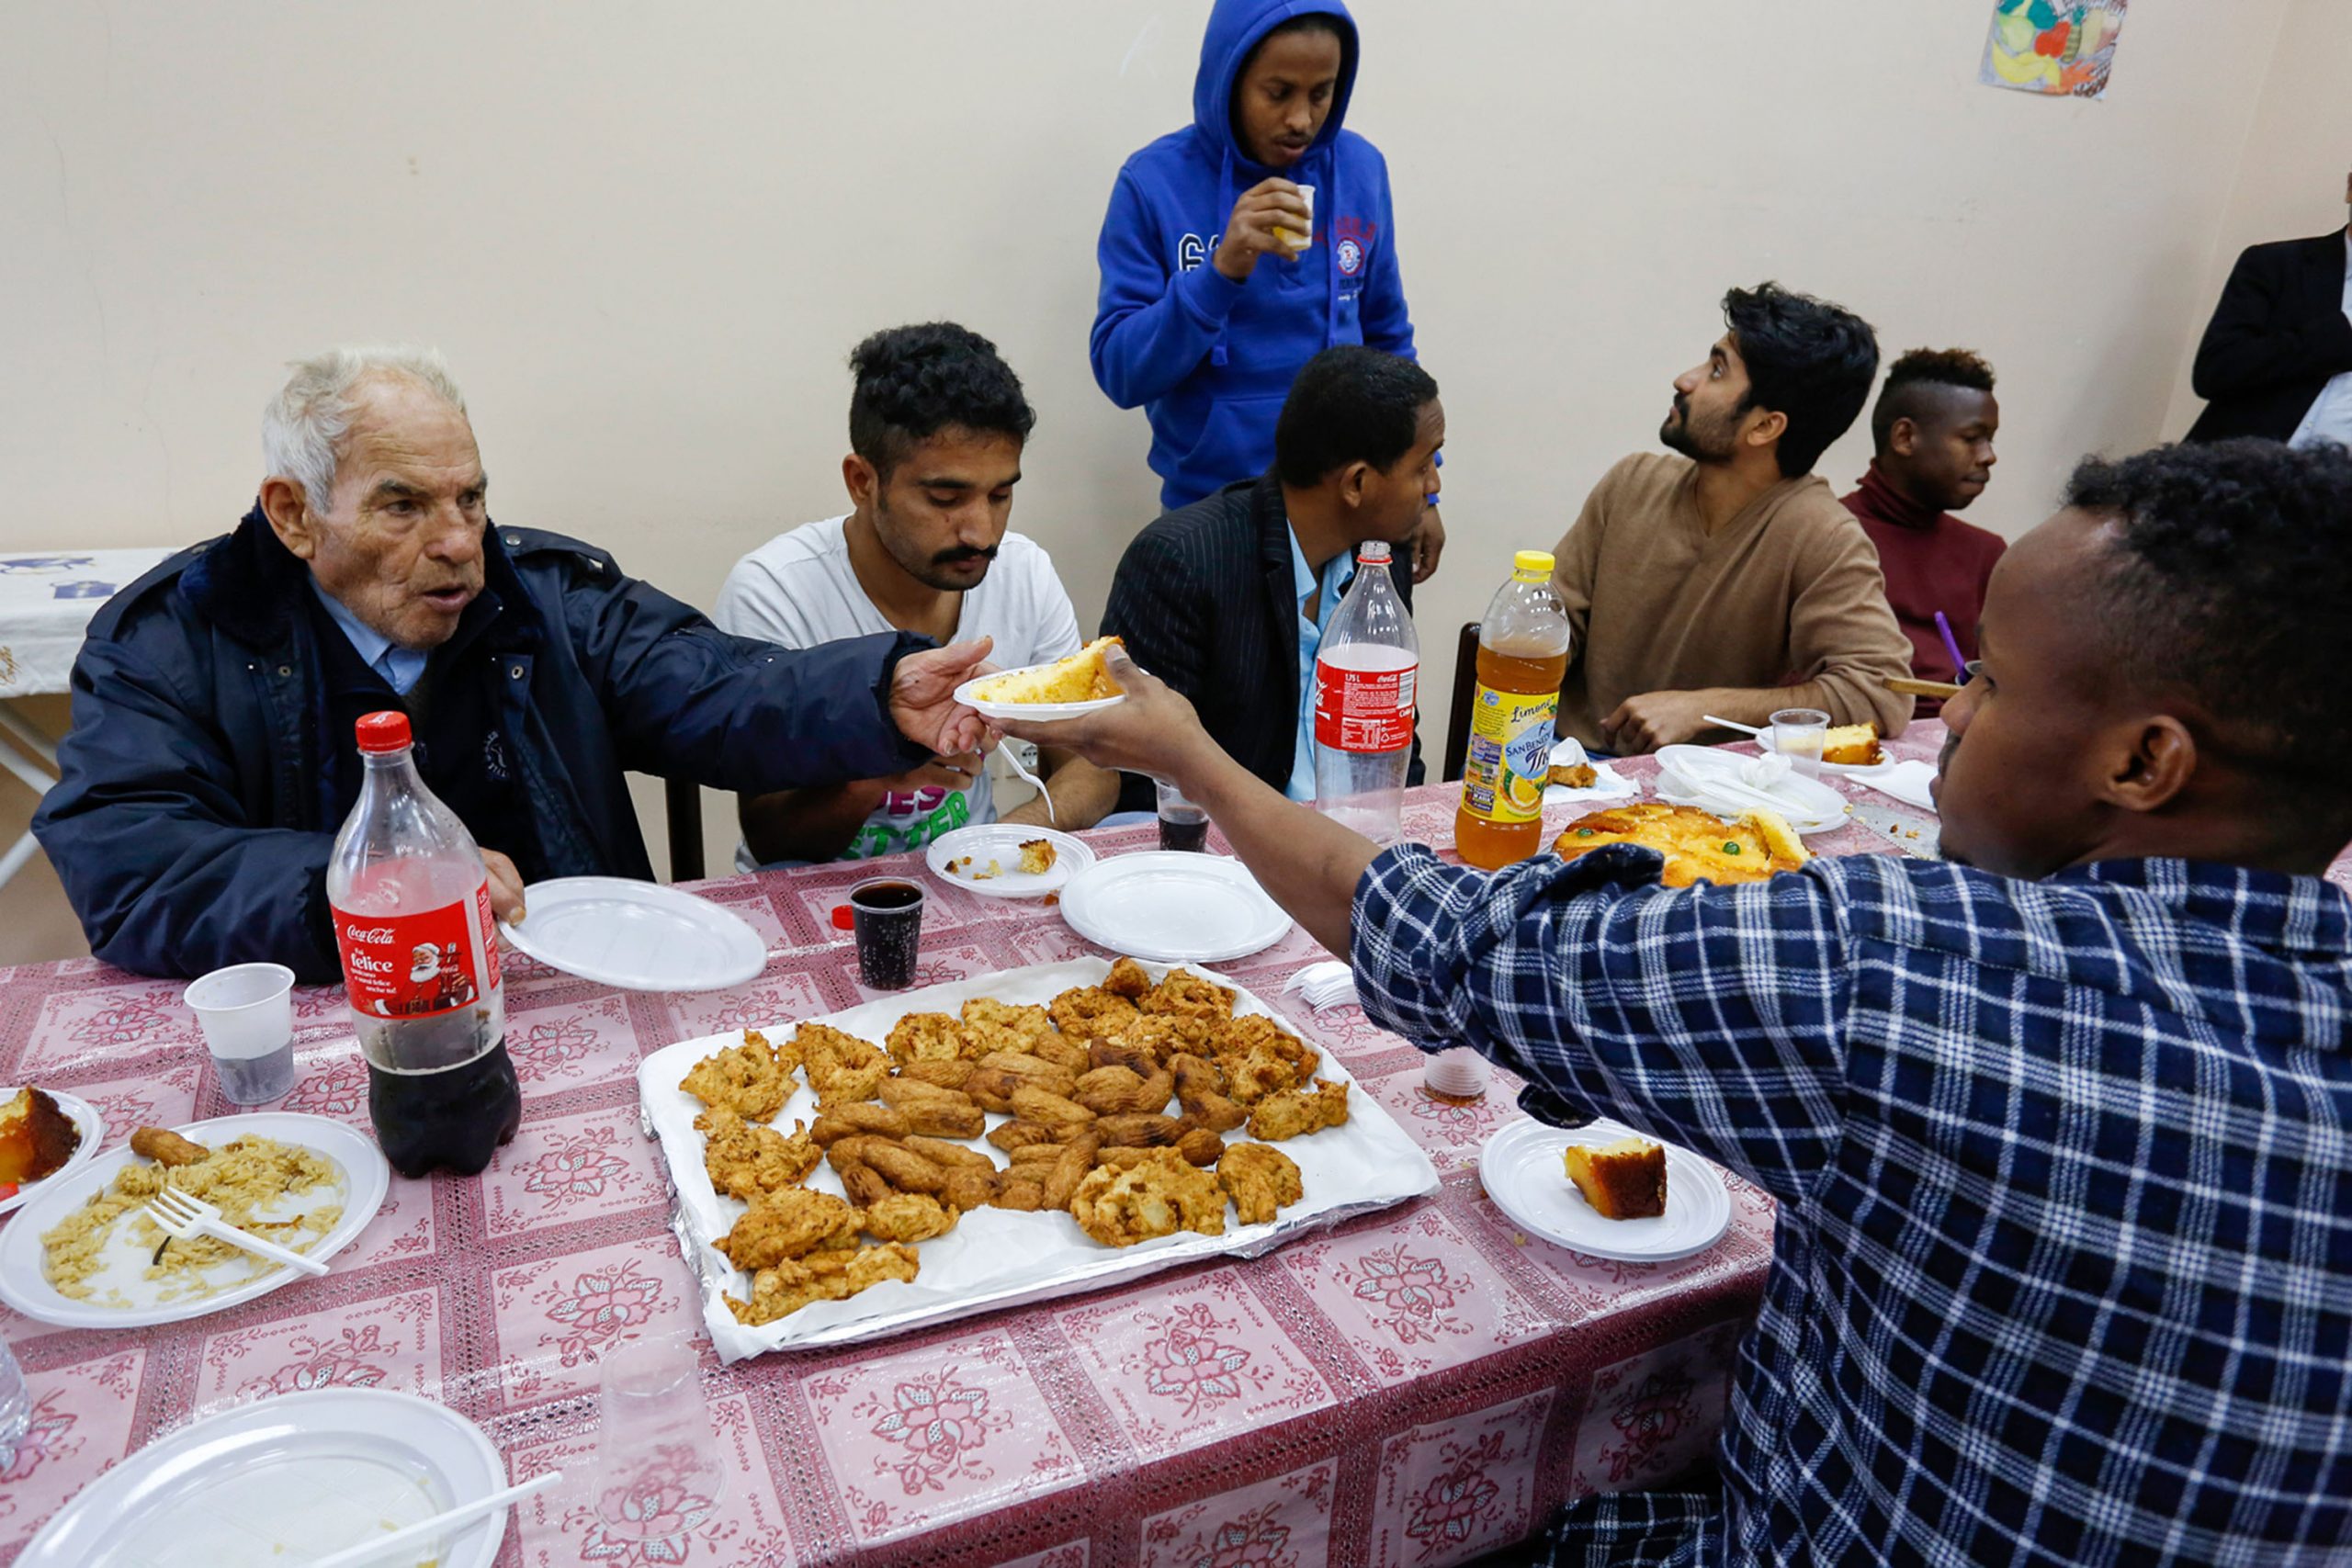 Local residents join refugees for a meal at the Palazzo Condo, a hostel for refugees in Satriano, Italy, on Monday, Feb. 15, 2016. XXX INSERT SECOND SENTENCE HERE XXX Photographer: Luke MacGregor/Bloomberg